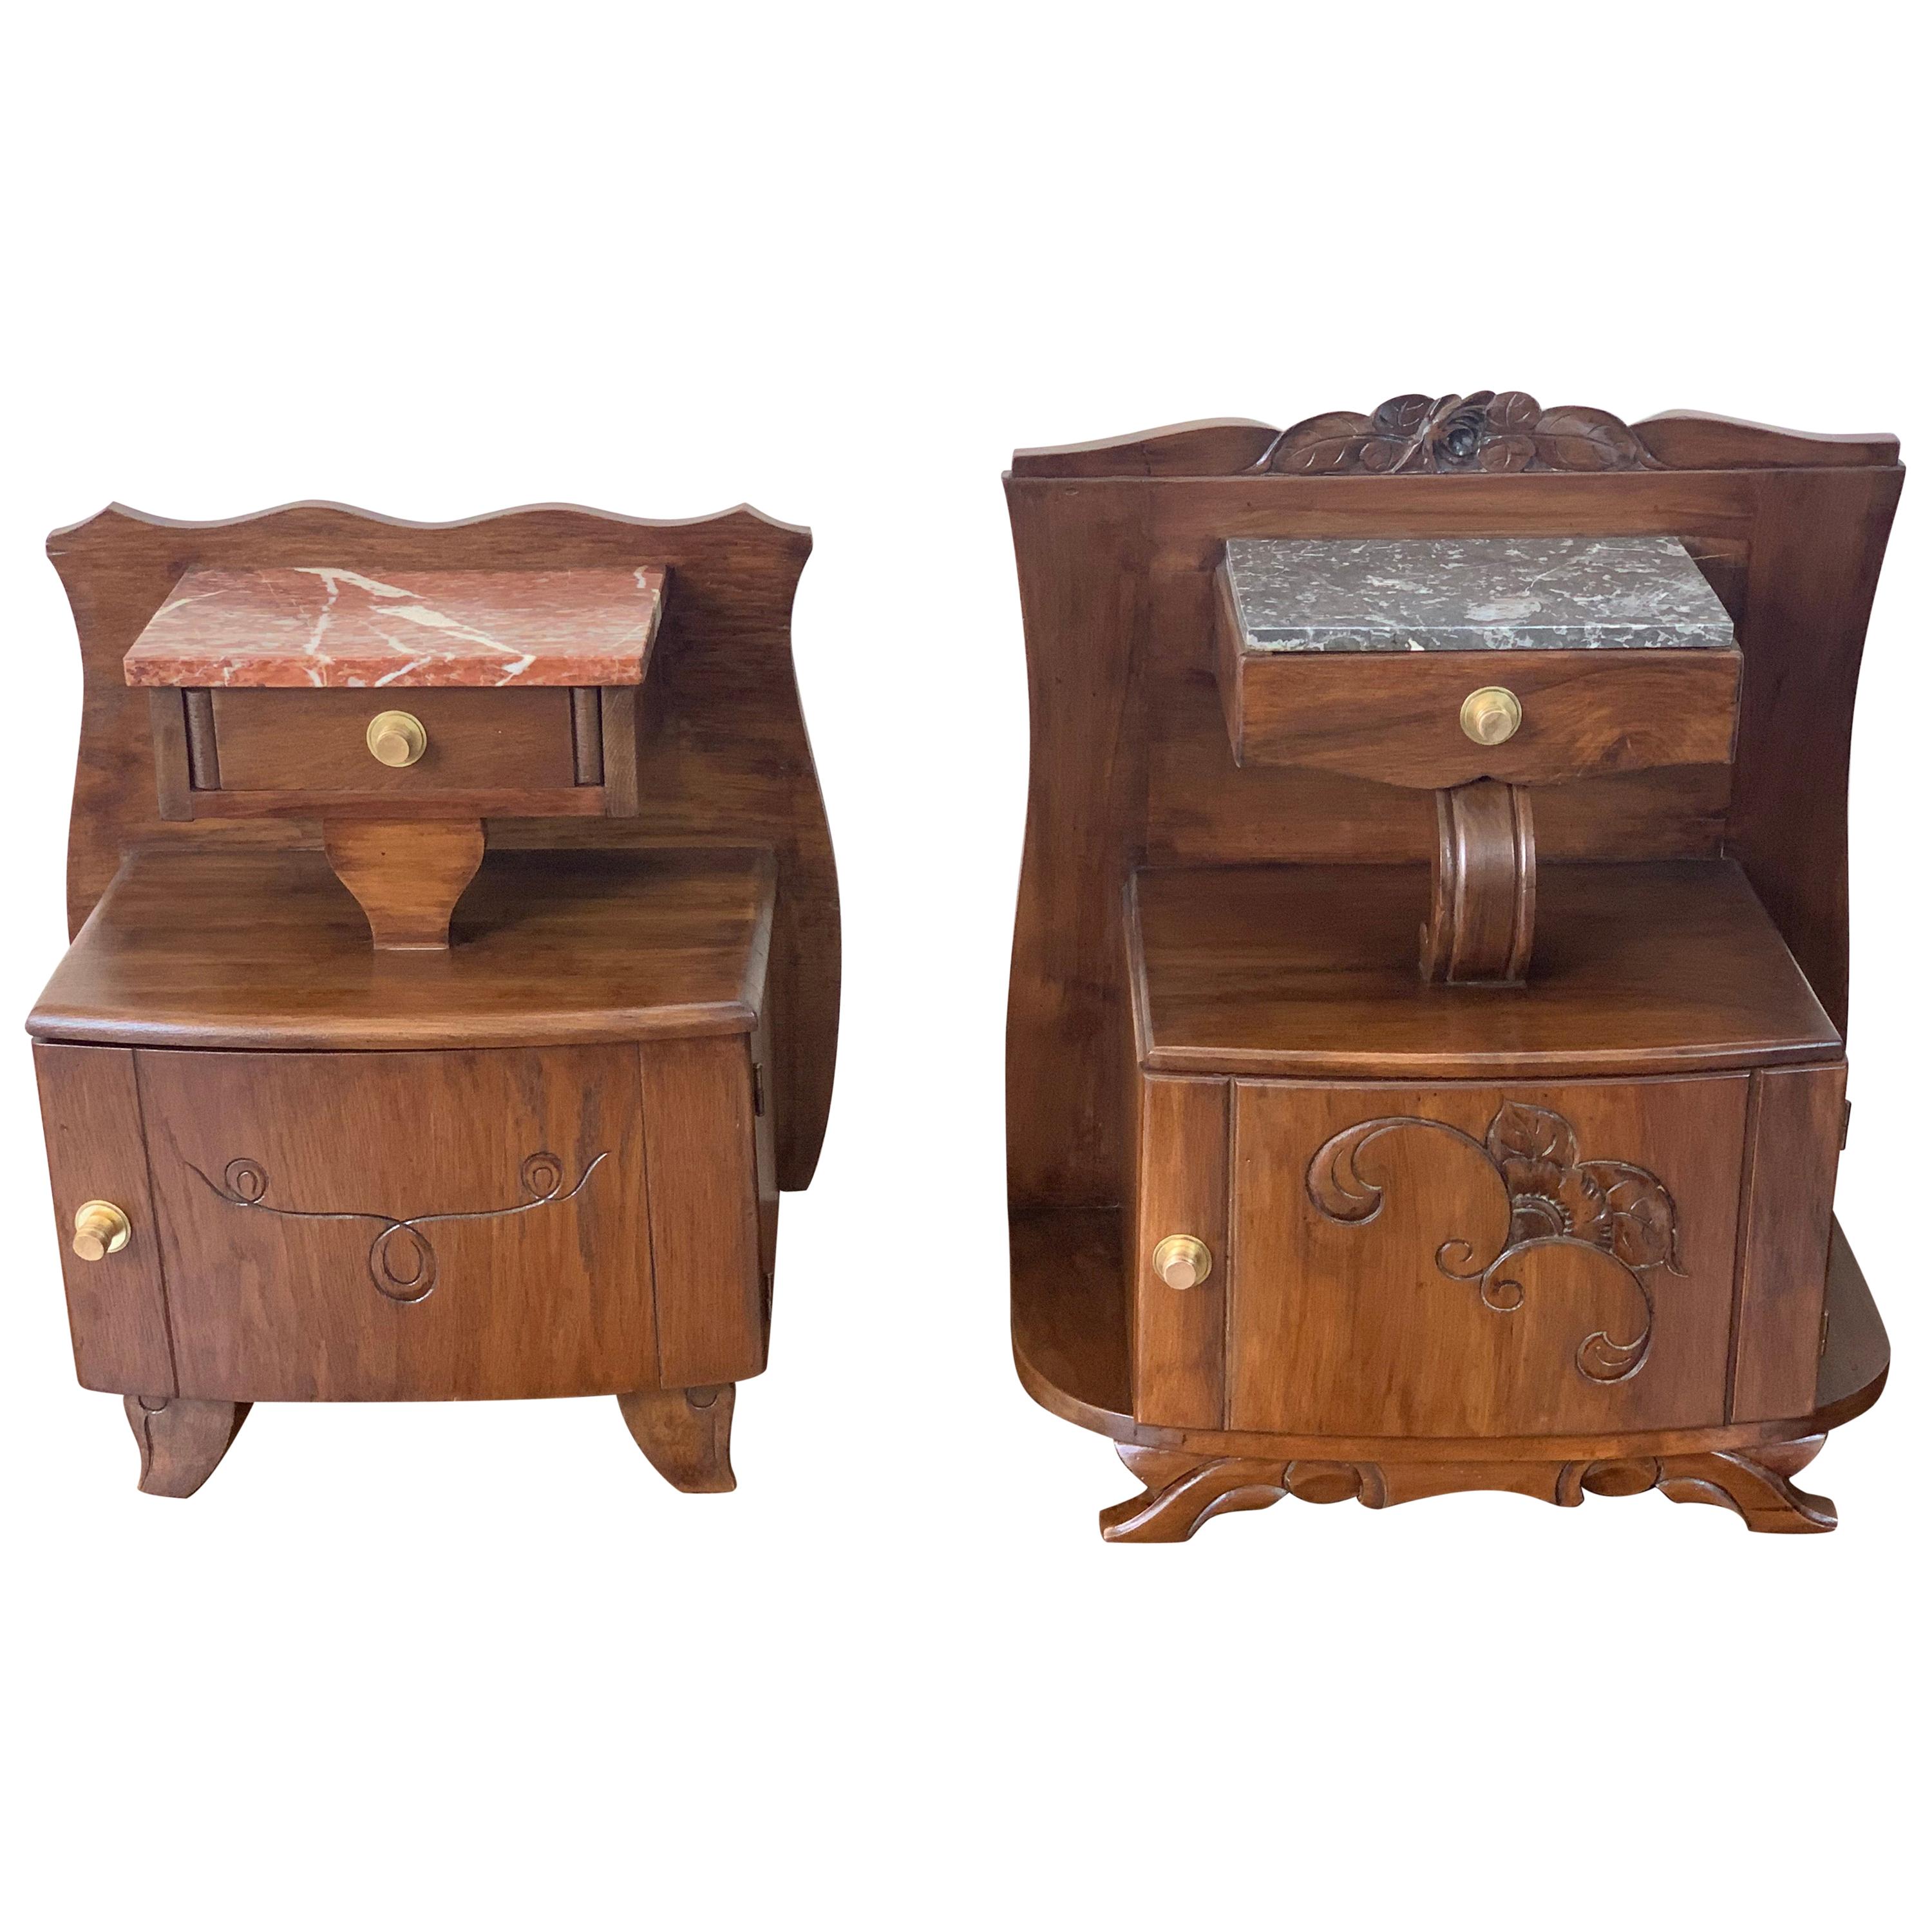 Art Nouveau Carved Nightstands / Bedside Tables with Marble Top, circa 1900 For Sale